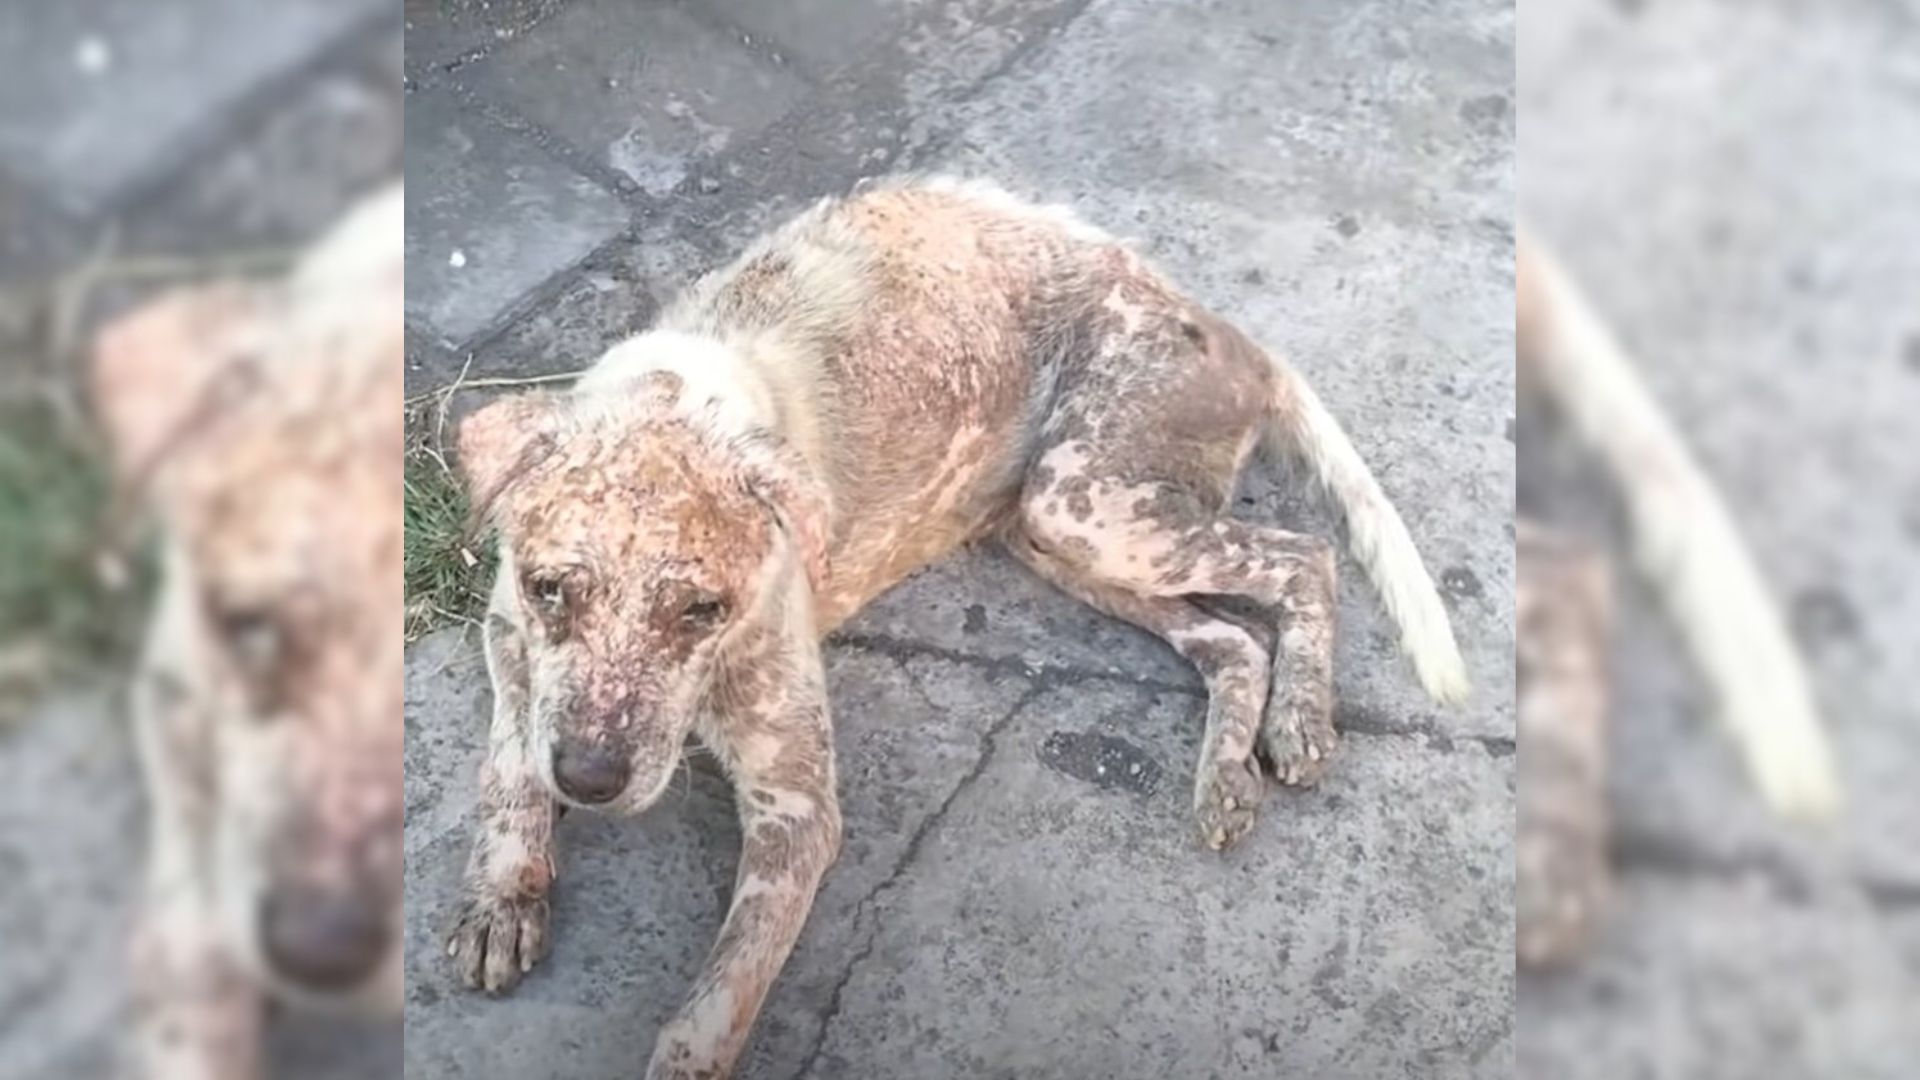 Rescuers Found A Malnourished Hairless Dog And Decided To Give Him A New Chance